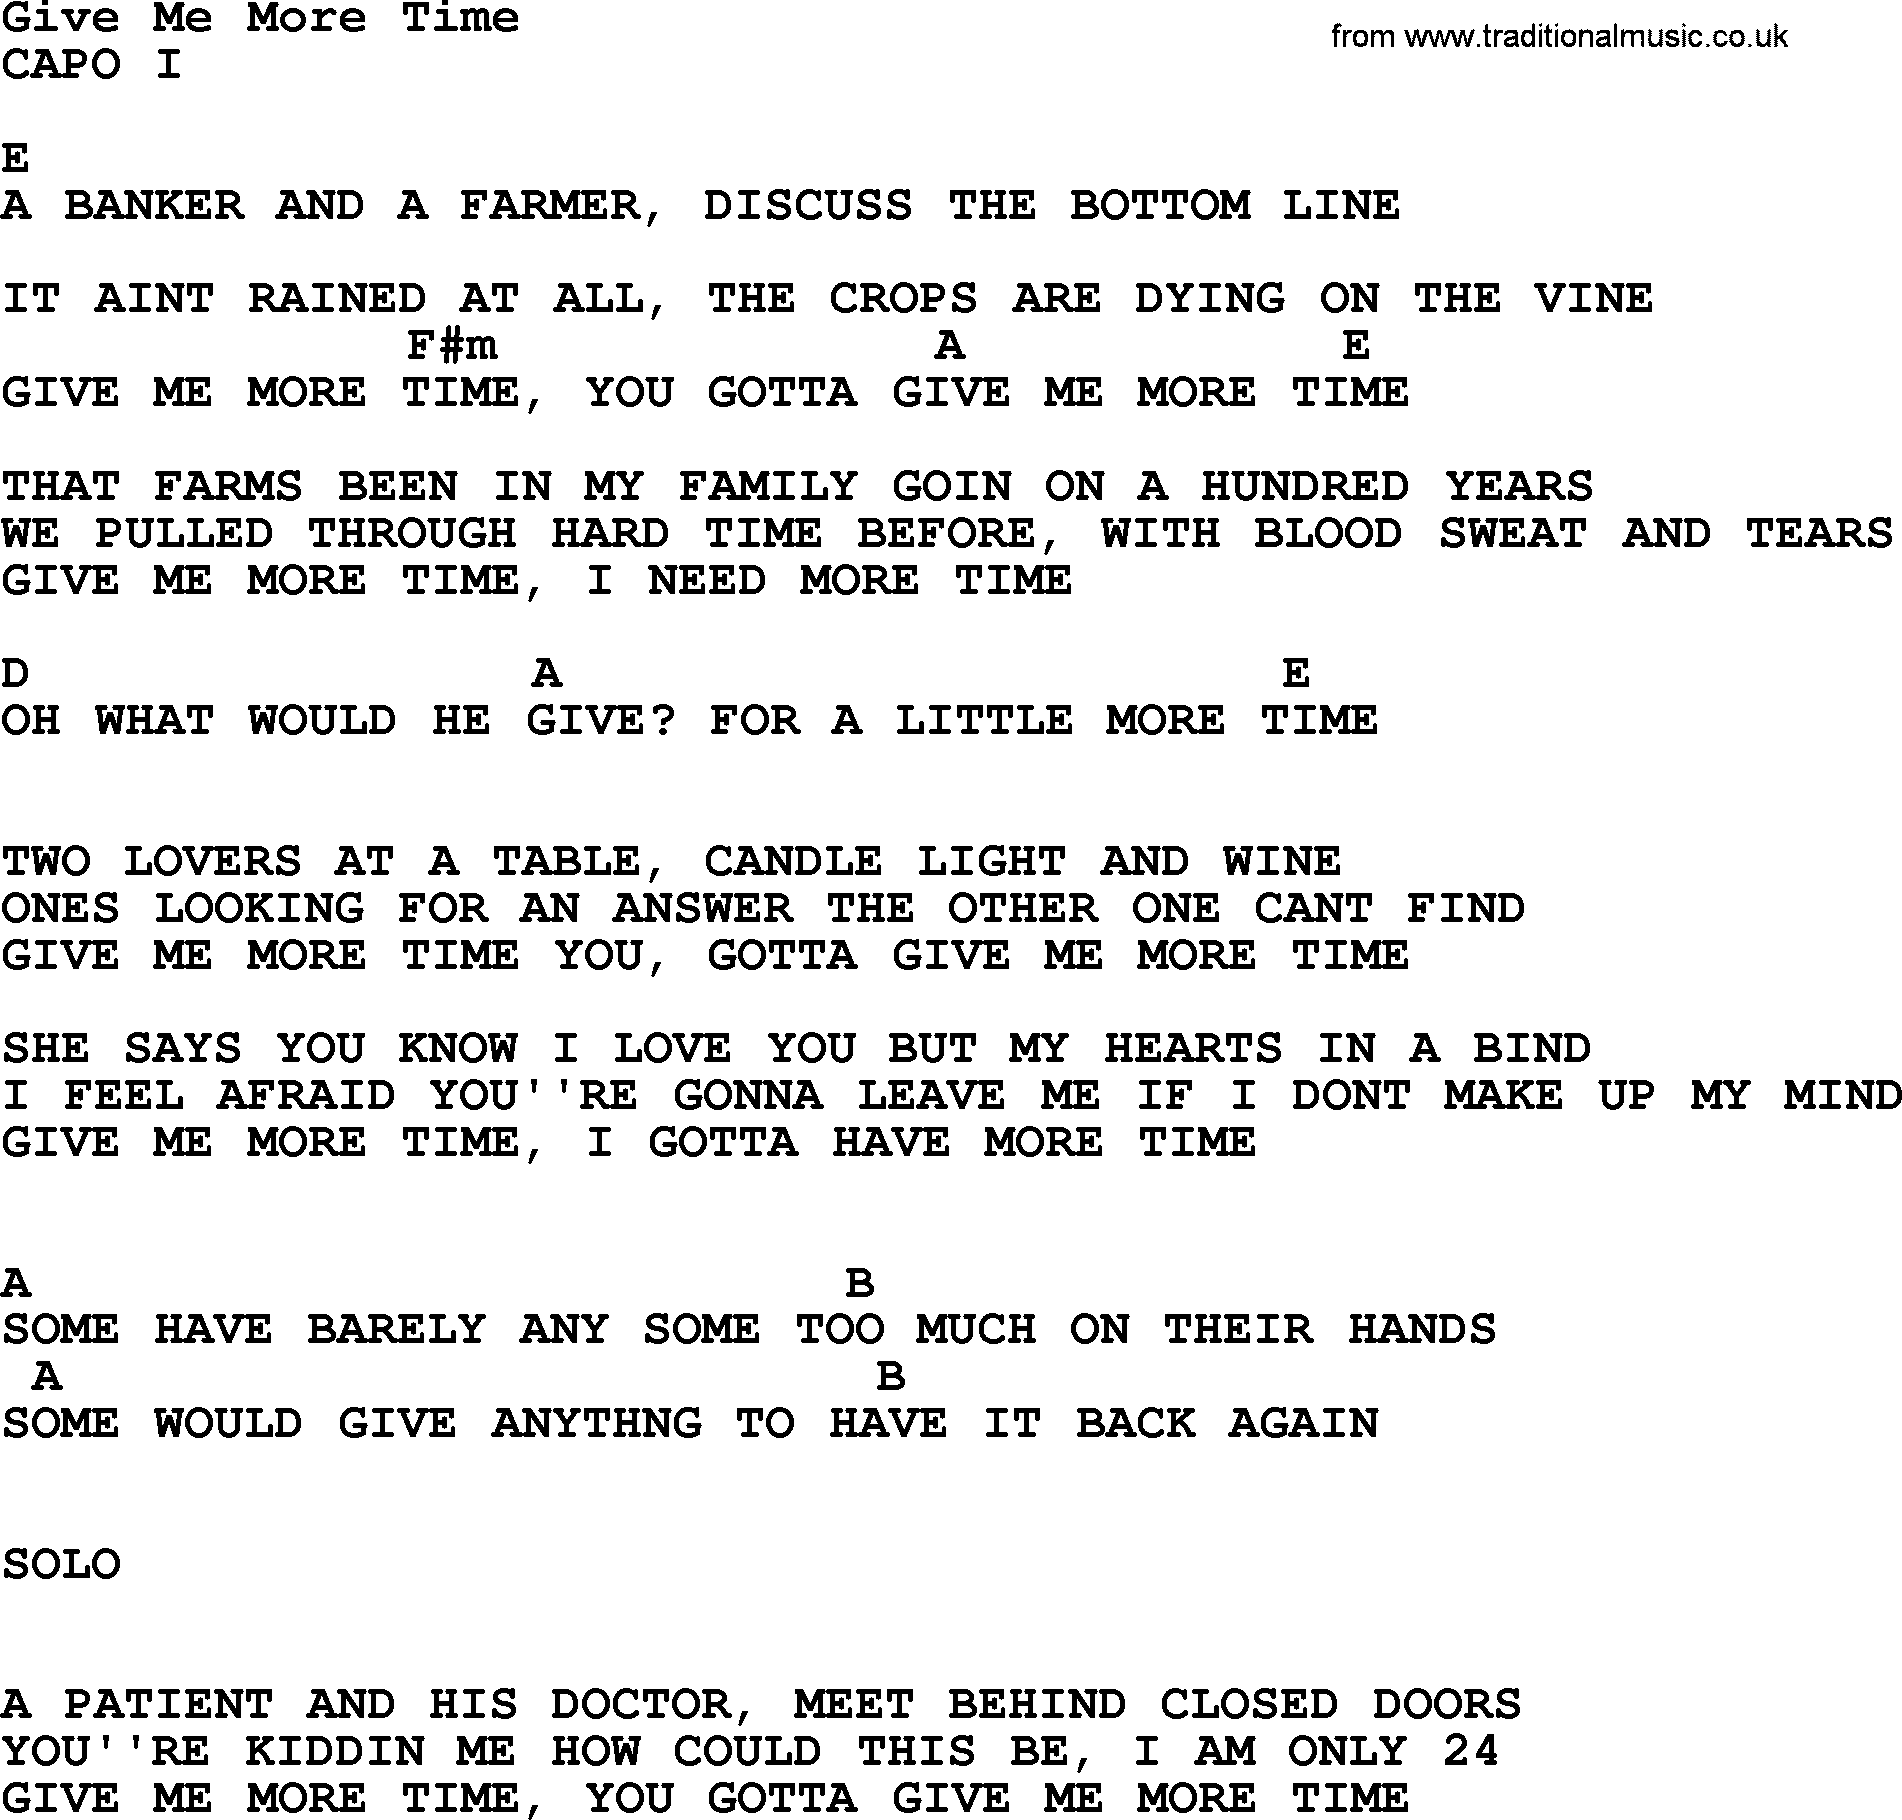 George Strait song: Give Me More Time, lyrics and chords